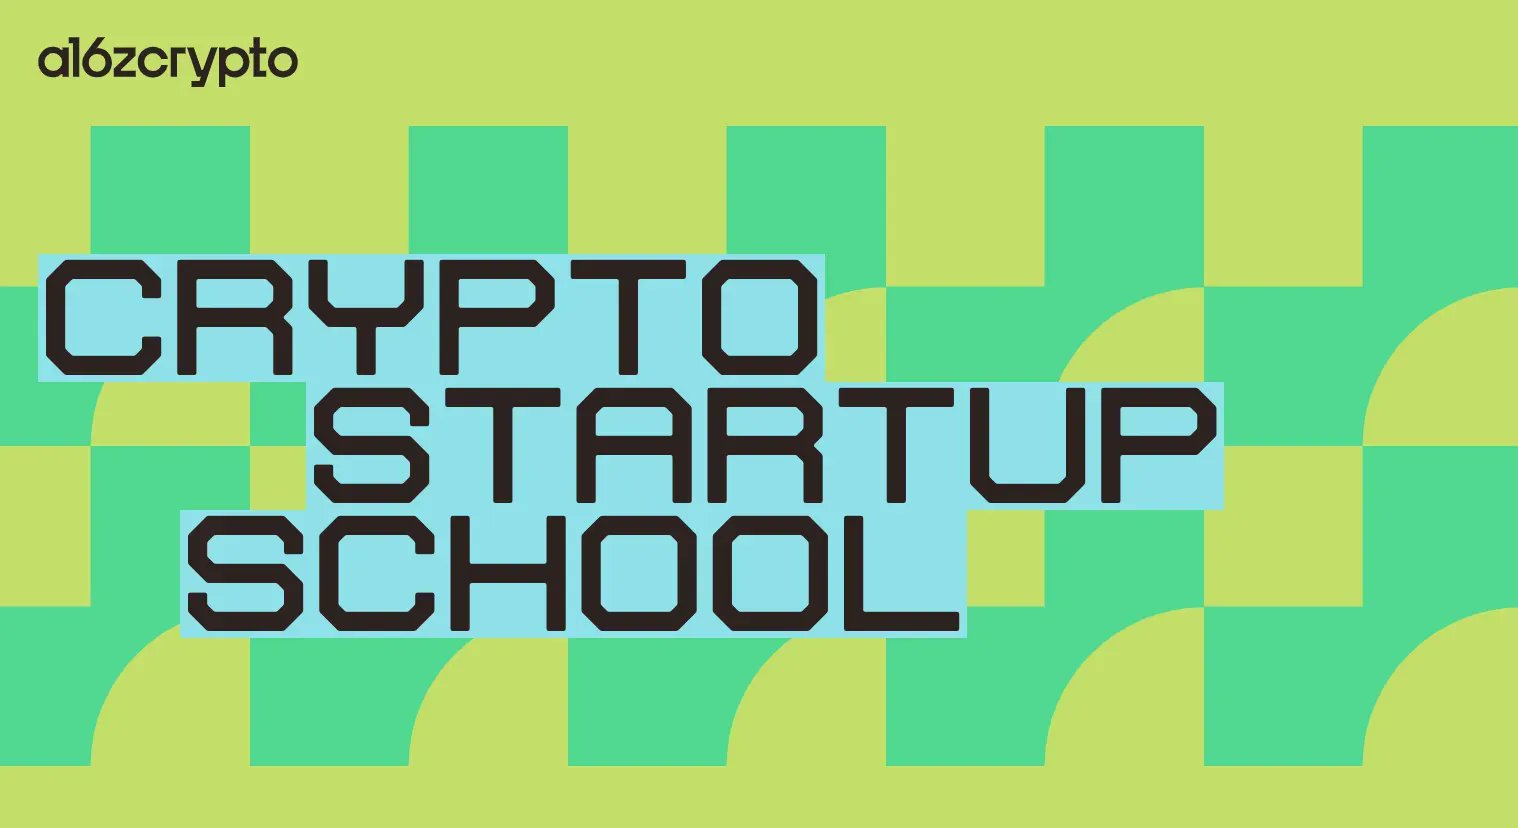 An Exploration of a16z Crypto Startup School Projects